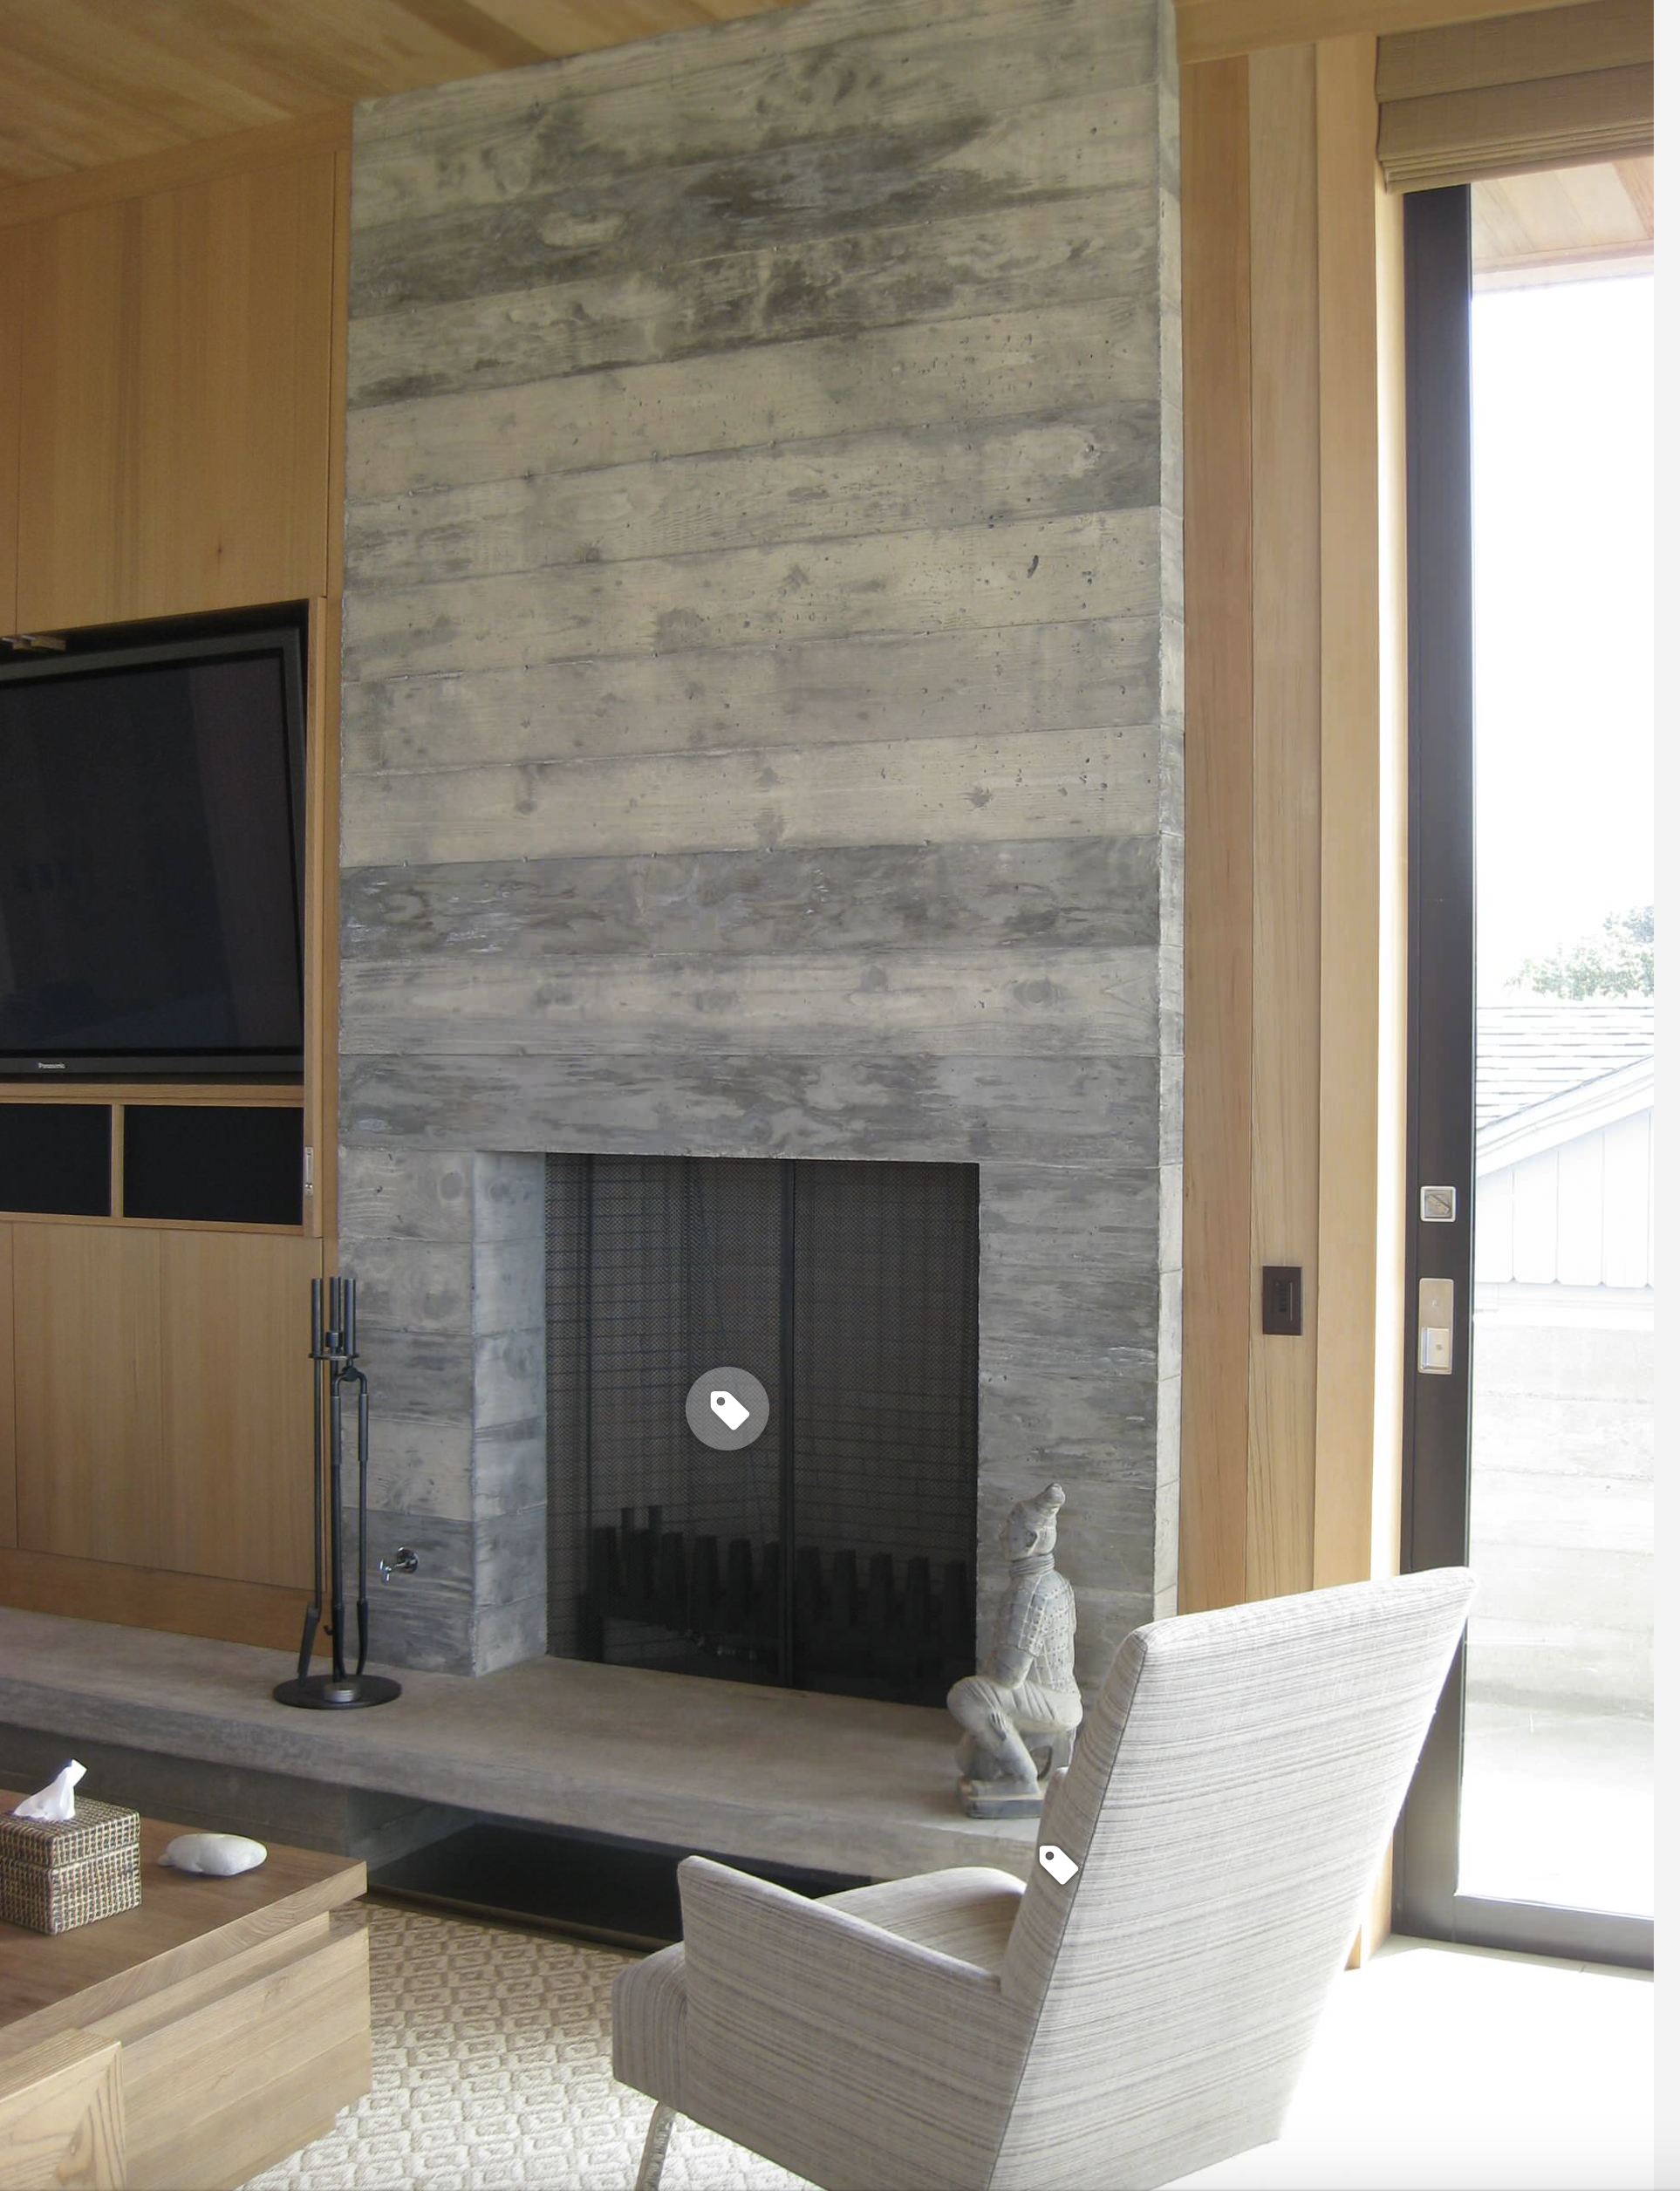 Tv Fireplace Wall Awesome Fireplace and Tv ÐÐ°Ð¼Ð¸Ð½